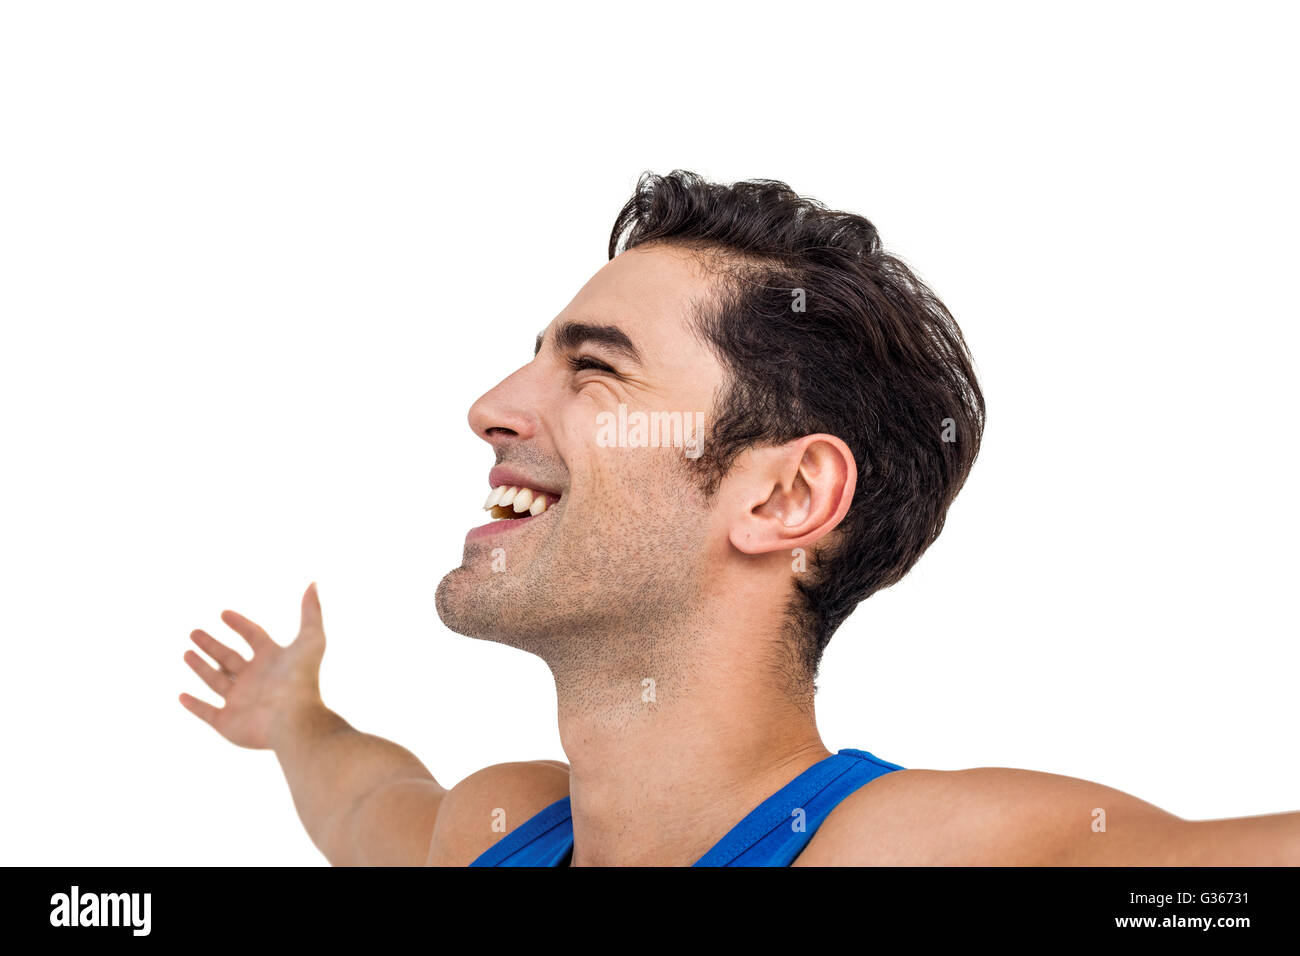 Excited male athlete with arms outstretched Stock Photo